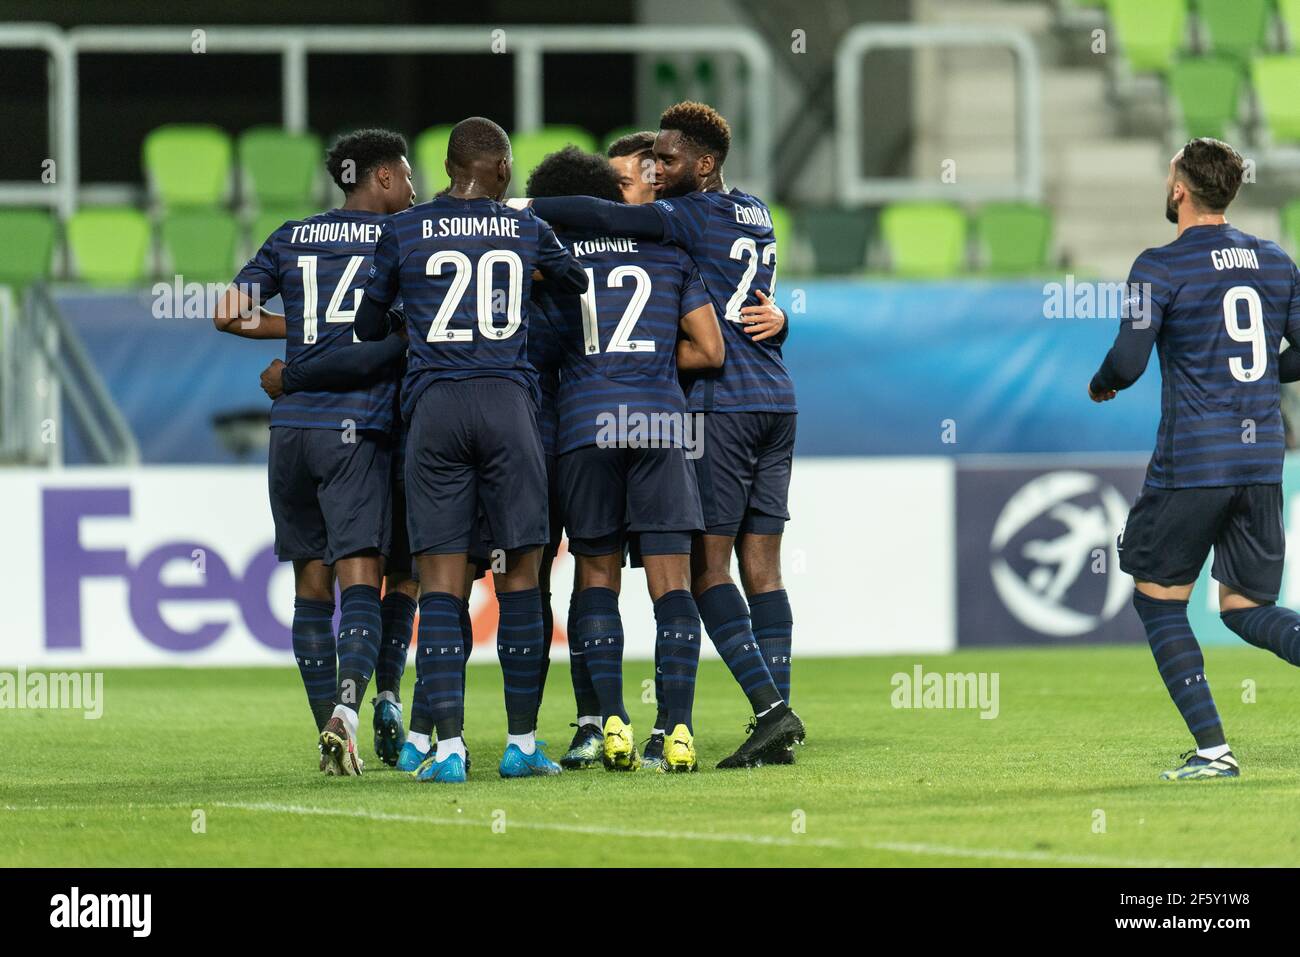 Szombathely, Hungary. 28th Mar, 2021. Jonathan Ikon (11) of France scores for 0-2 from the penalty spot ande celebrates with the team during the UEFA EURO U-21 match between Russia and France at Haladas Stadium in Szombathely. (Photo Credit: Gonzales Photo/Alamy Live News Stock Photo